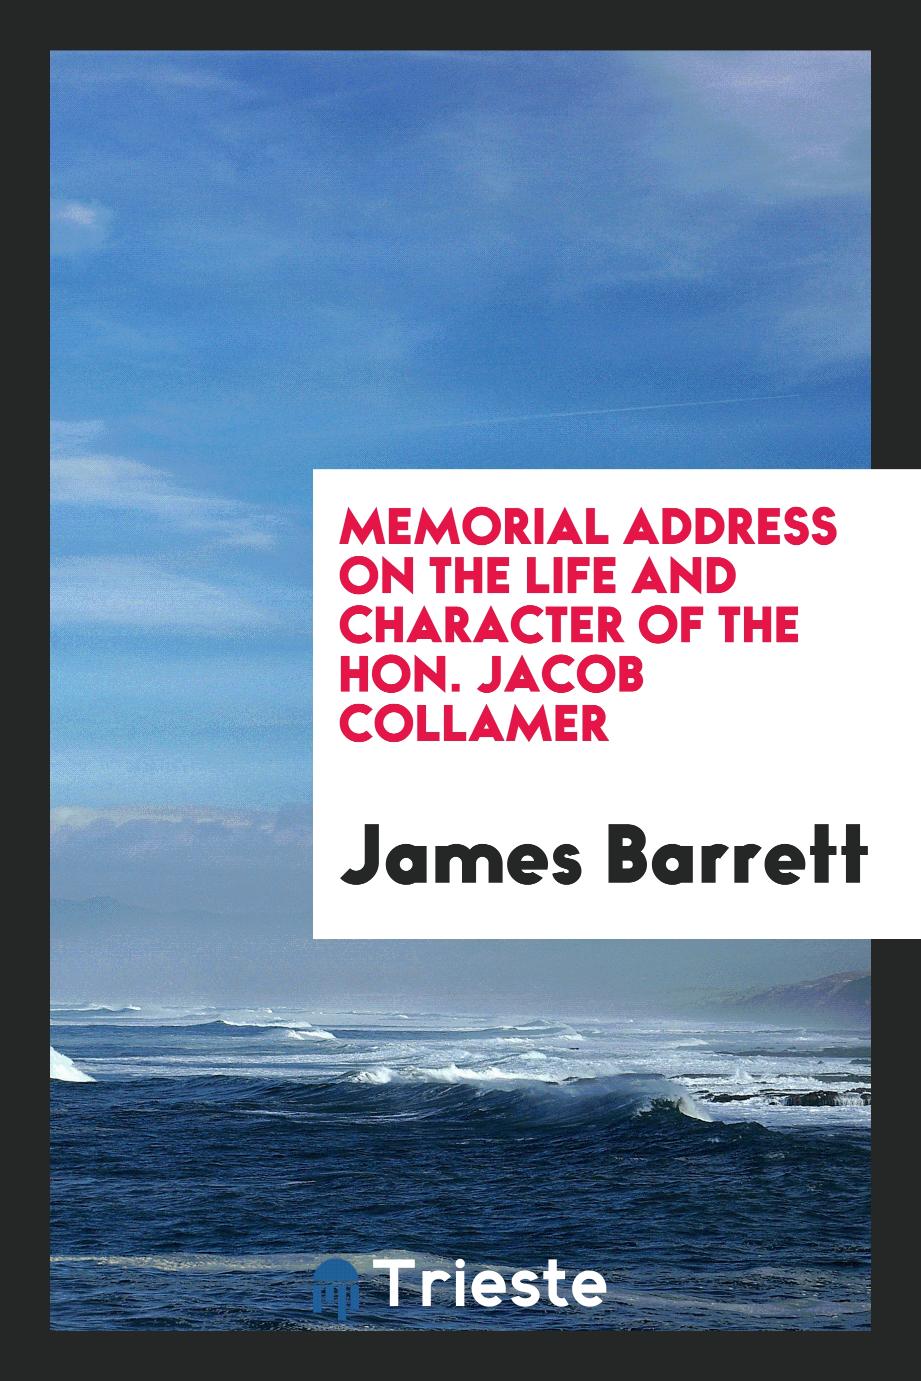 Memorial Address on the Life and Character of the Hon. Jacob Collamer